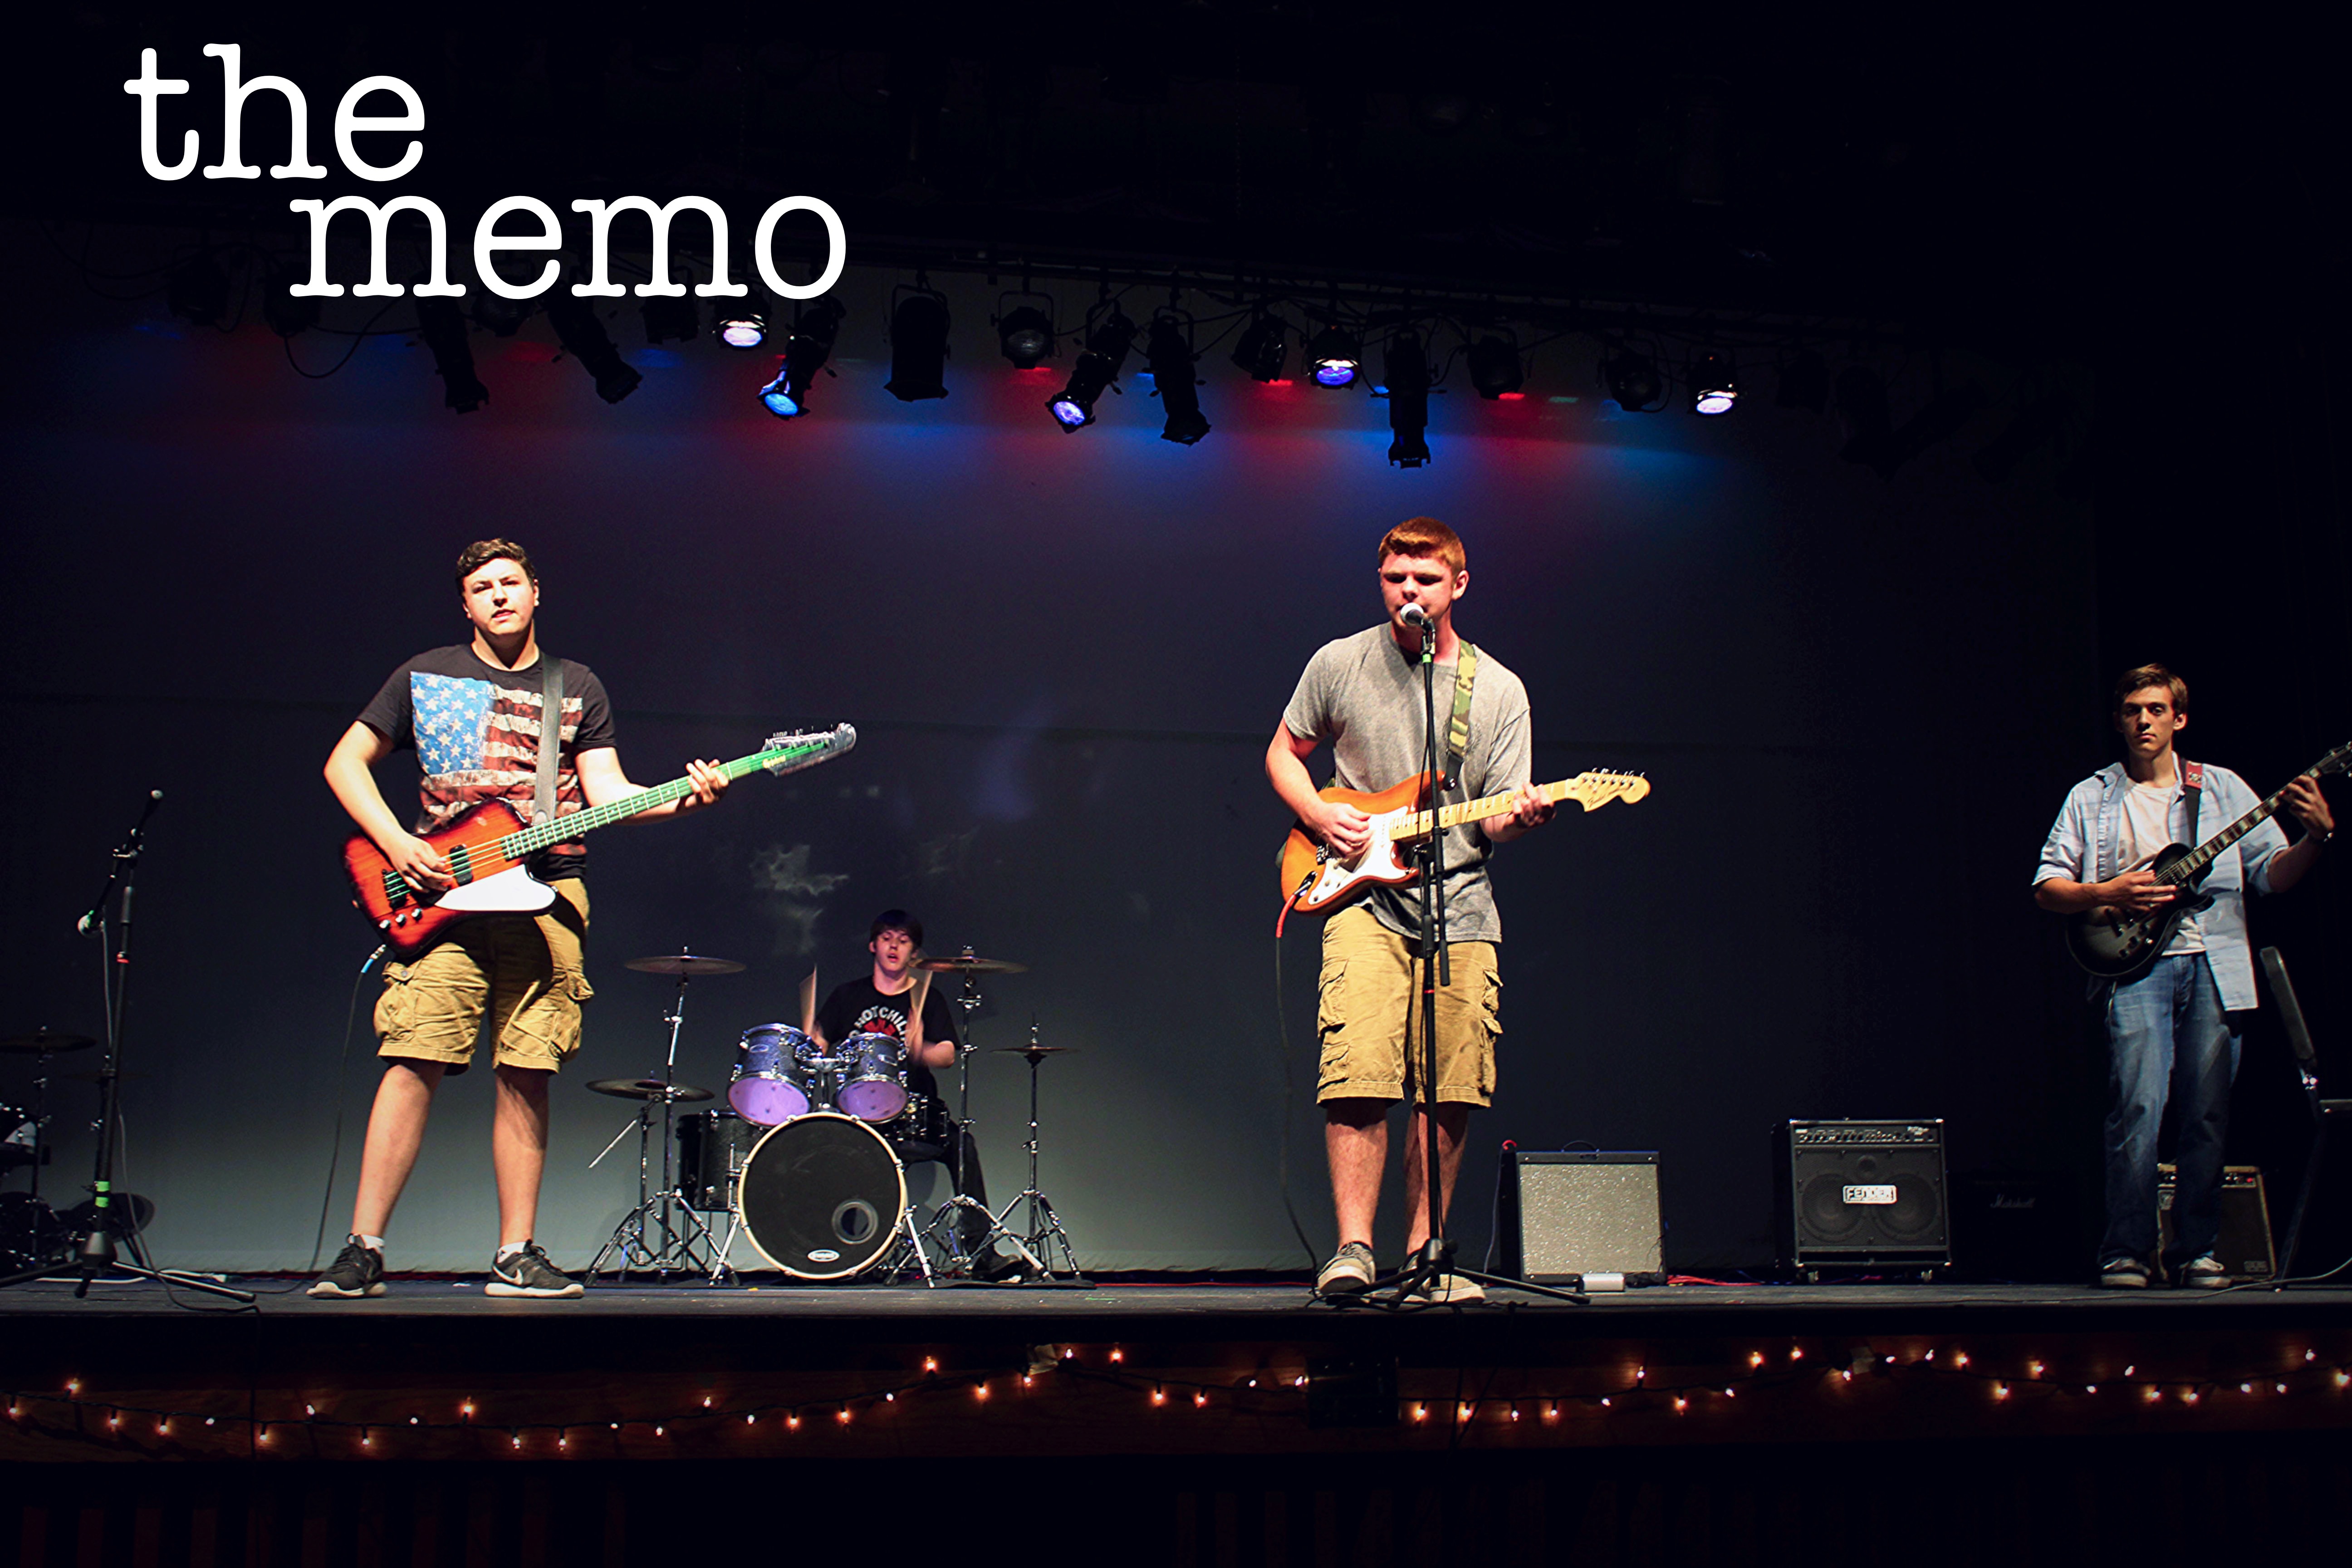 Indie Band The Memo Hopes to Make a Change